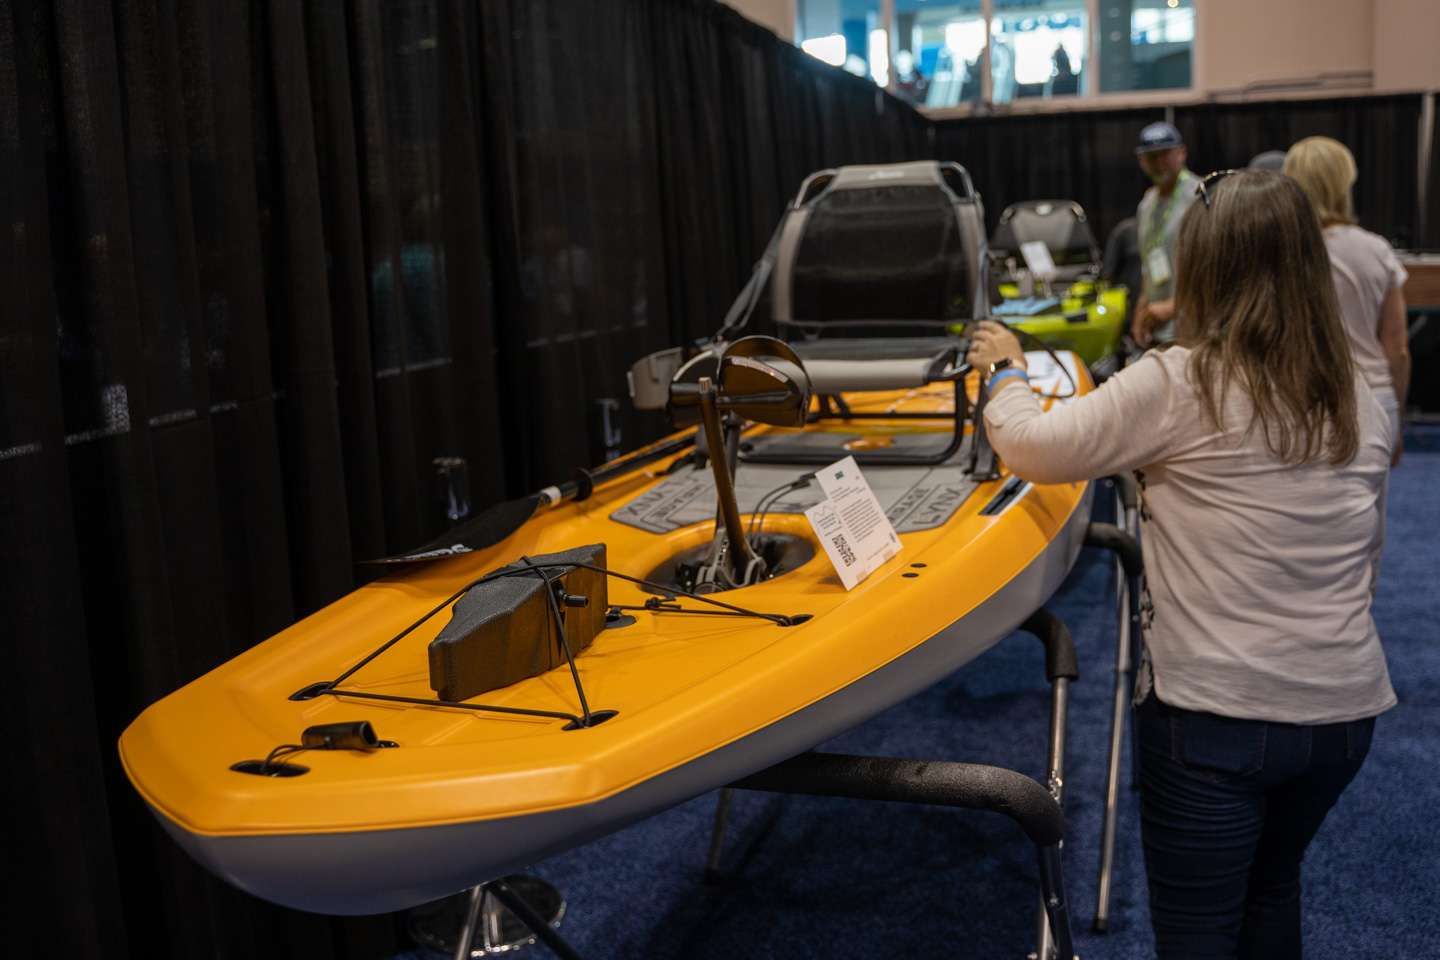 <b>Hobie Mirage Lynx - Pedal Fishing Kayak</b><br> The speed of the patented Forward/Reversing MirageDrive 180 with Kick-Up fins combined with the flat-bottom design make a truly unique kayak. 